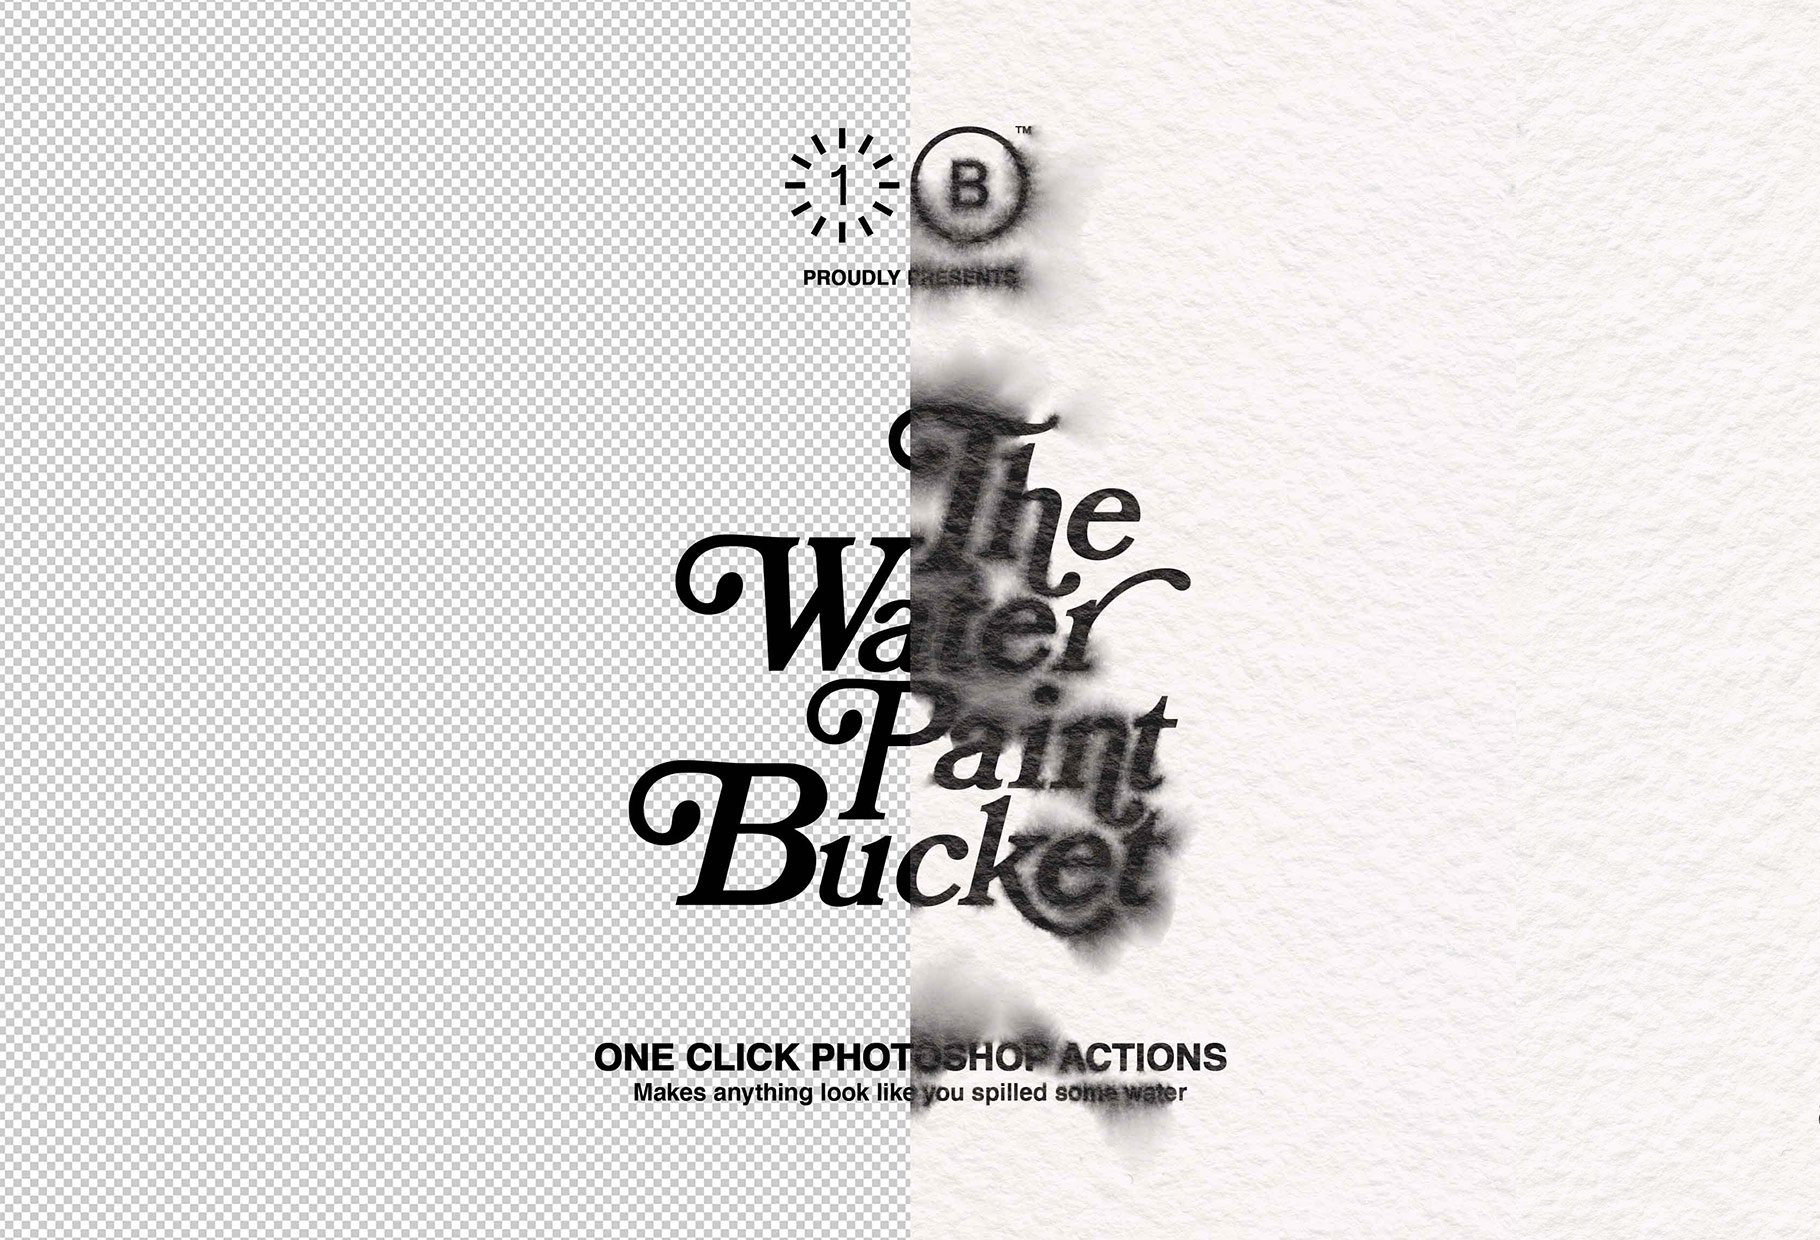 The Water Paint Bucket - One Clickpreview image.